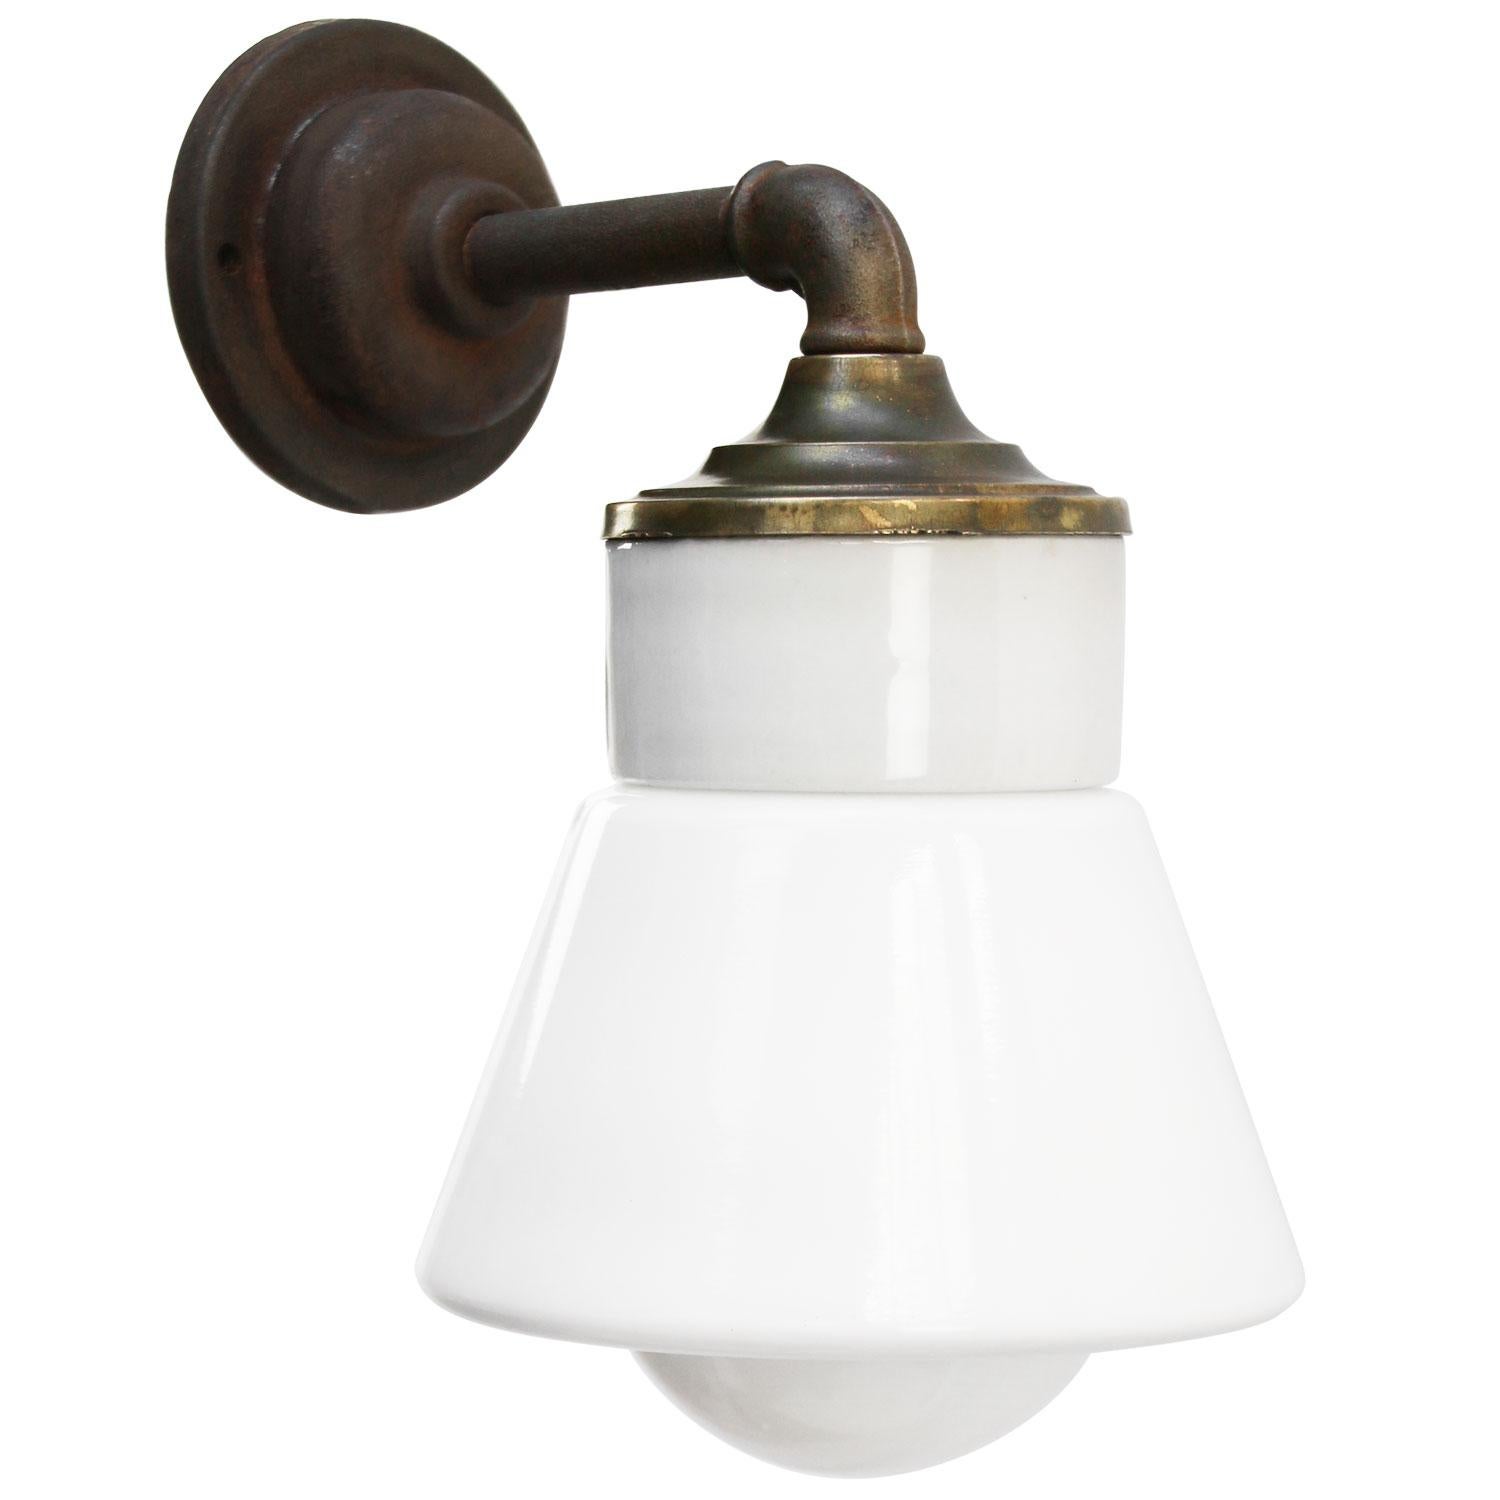 Porcelain industrial wall lamp.
White porcelain, brass and cast iron
White Opaline glass.
2 conductors, no ground.

Diameter cast iron wall piece 10 cm. 2 holes to secure.

Weight: 2.30 kg / 5.1 lb

Priced per individual item. All lamps have been